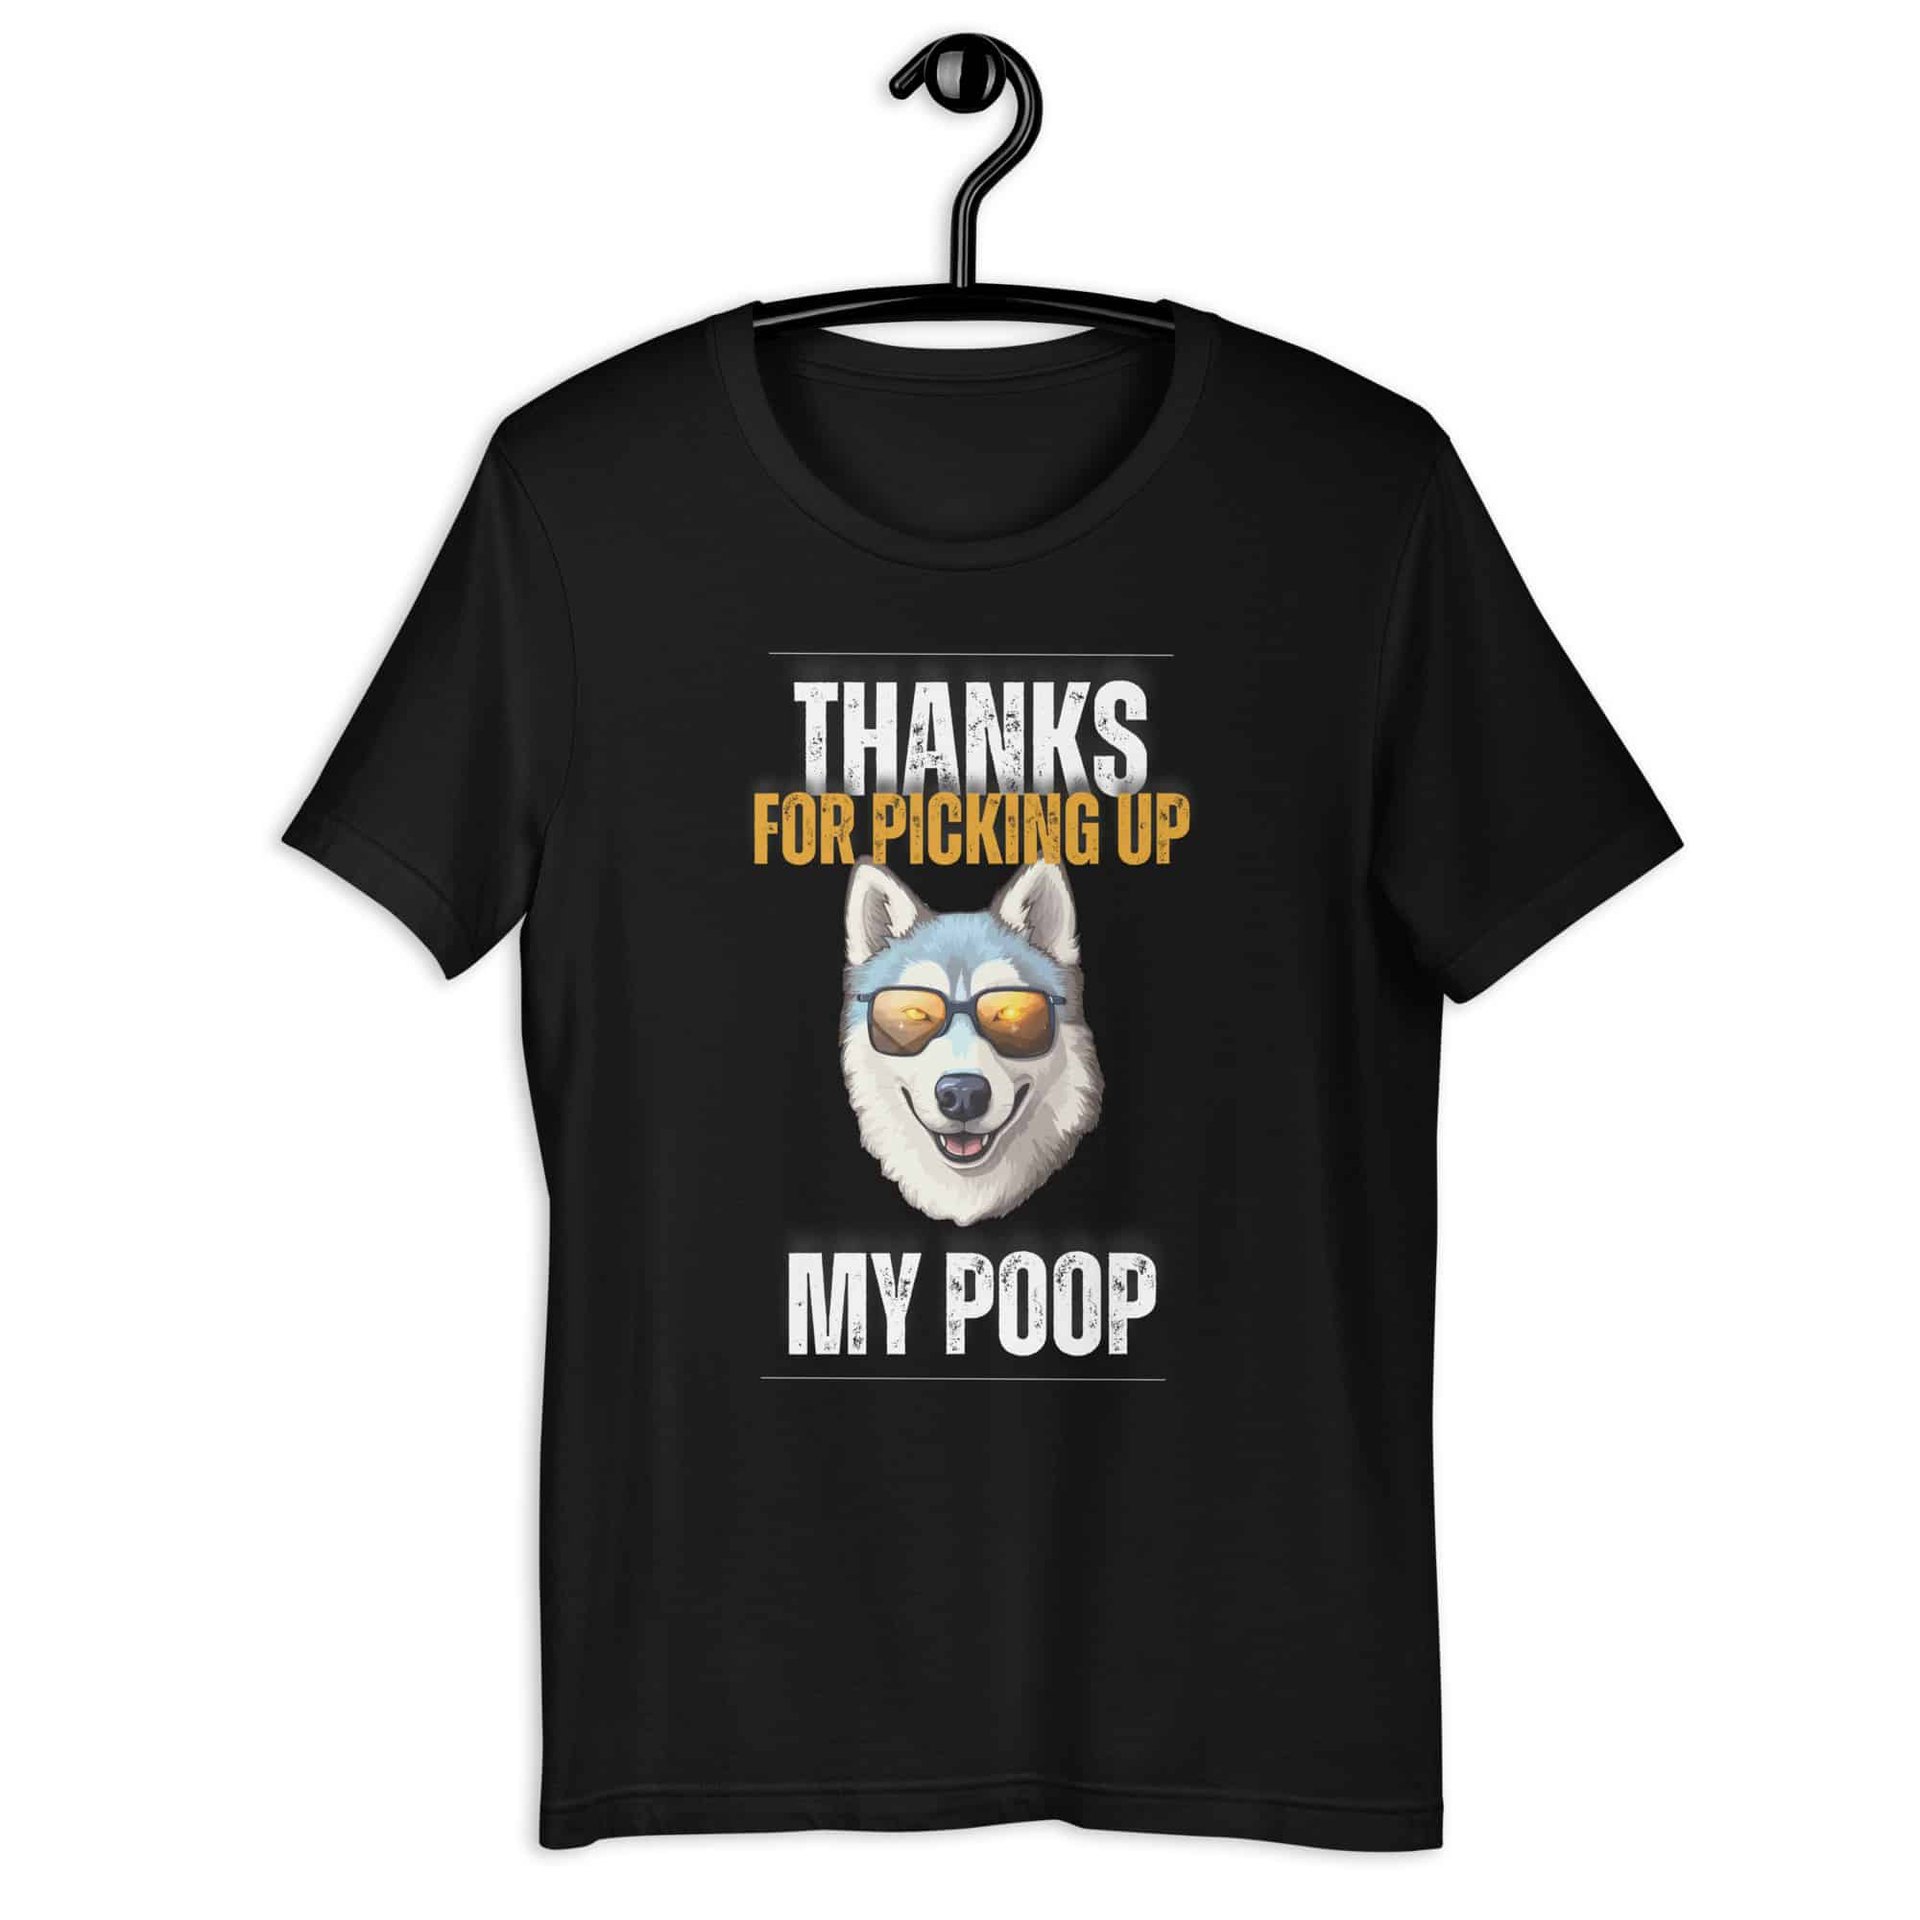 Thanks For Picking Up My POOP Funny Huskies Unisex T-Shirt. Black